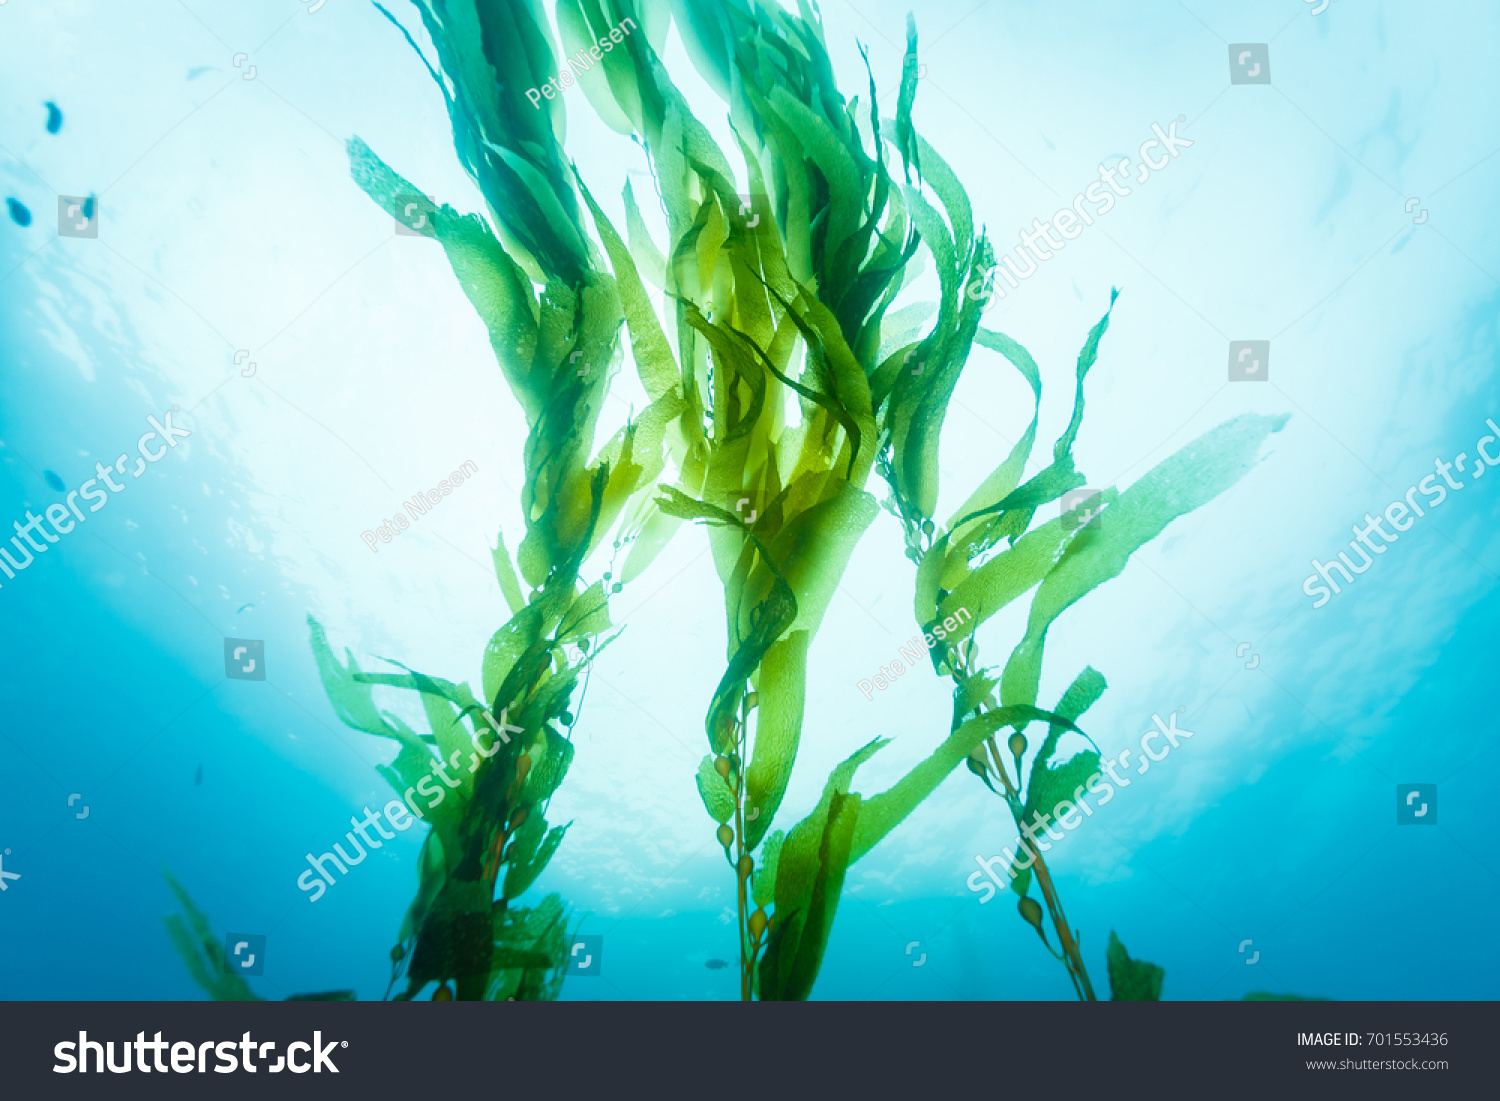 Three strands of kelp wave lazily up in the ocean current #701553436